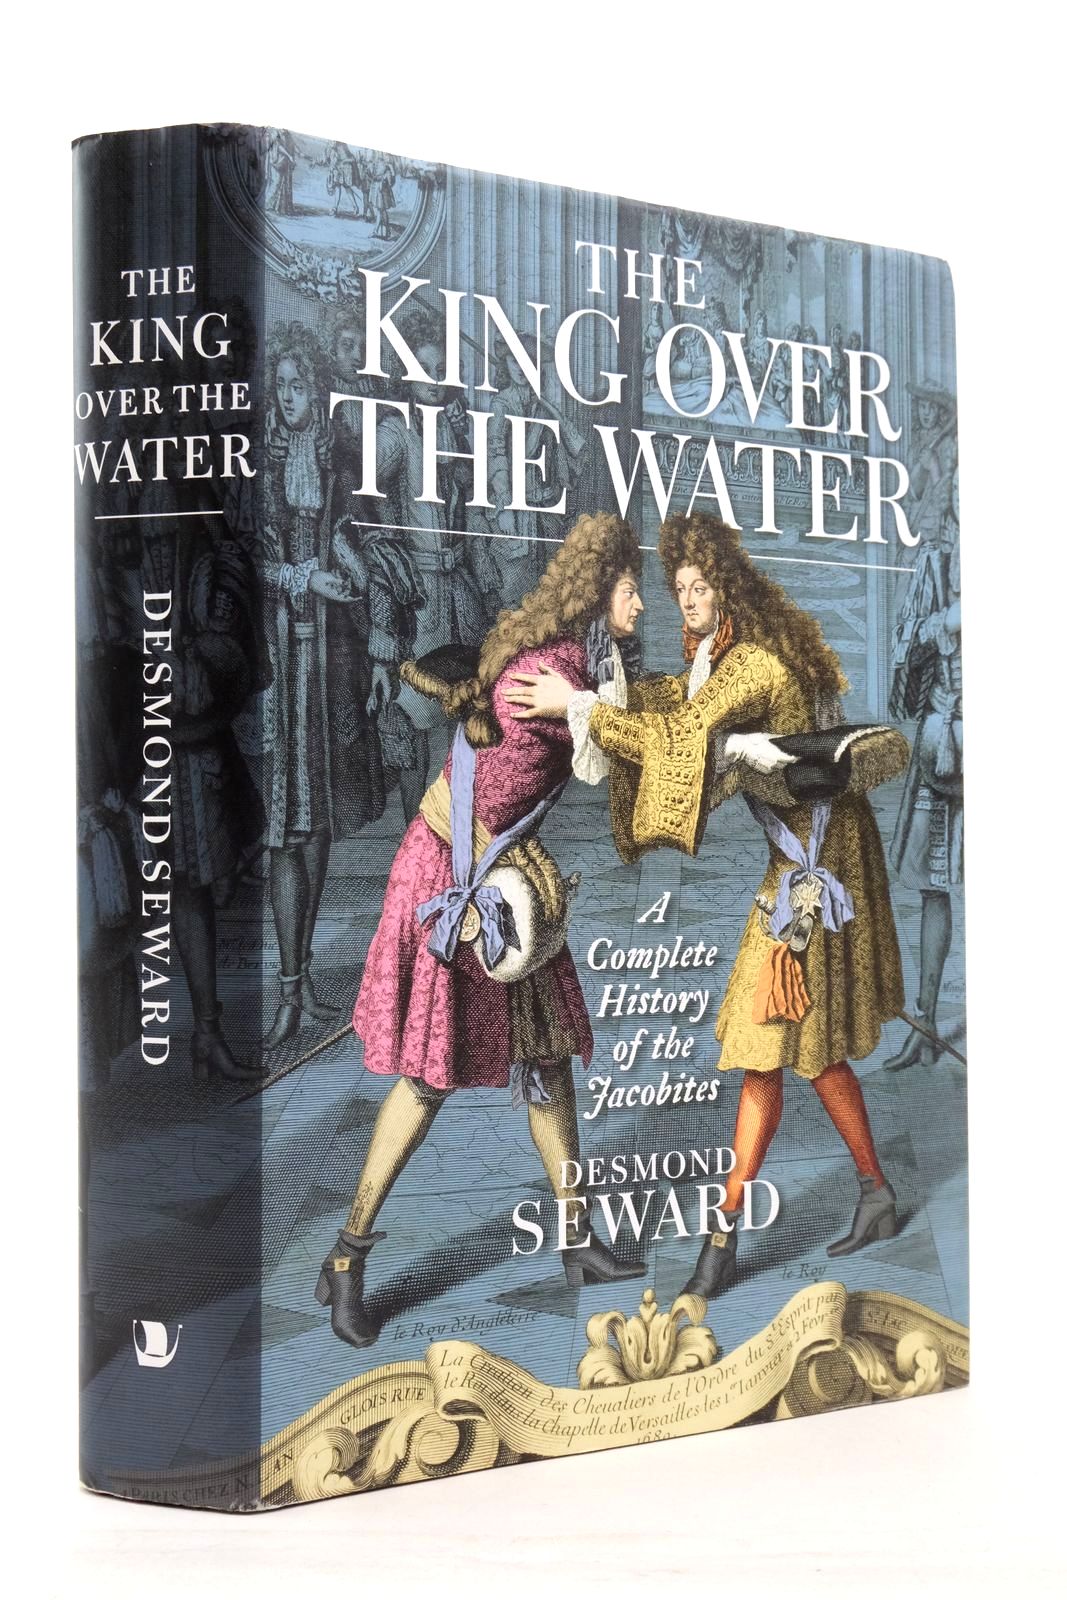 Photo of THE KING OVER THE WATER: A COMPLETE HISTORY OF THE JACOBITES written by Seward, Desmond published by Birlinn Limited (STOCK CODE: 2137852)  for sale by Stella & Rose's Books